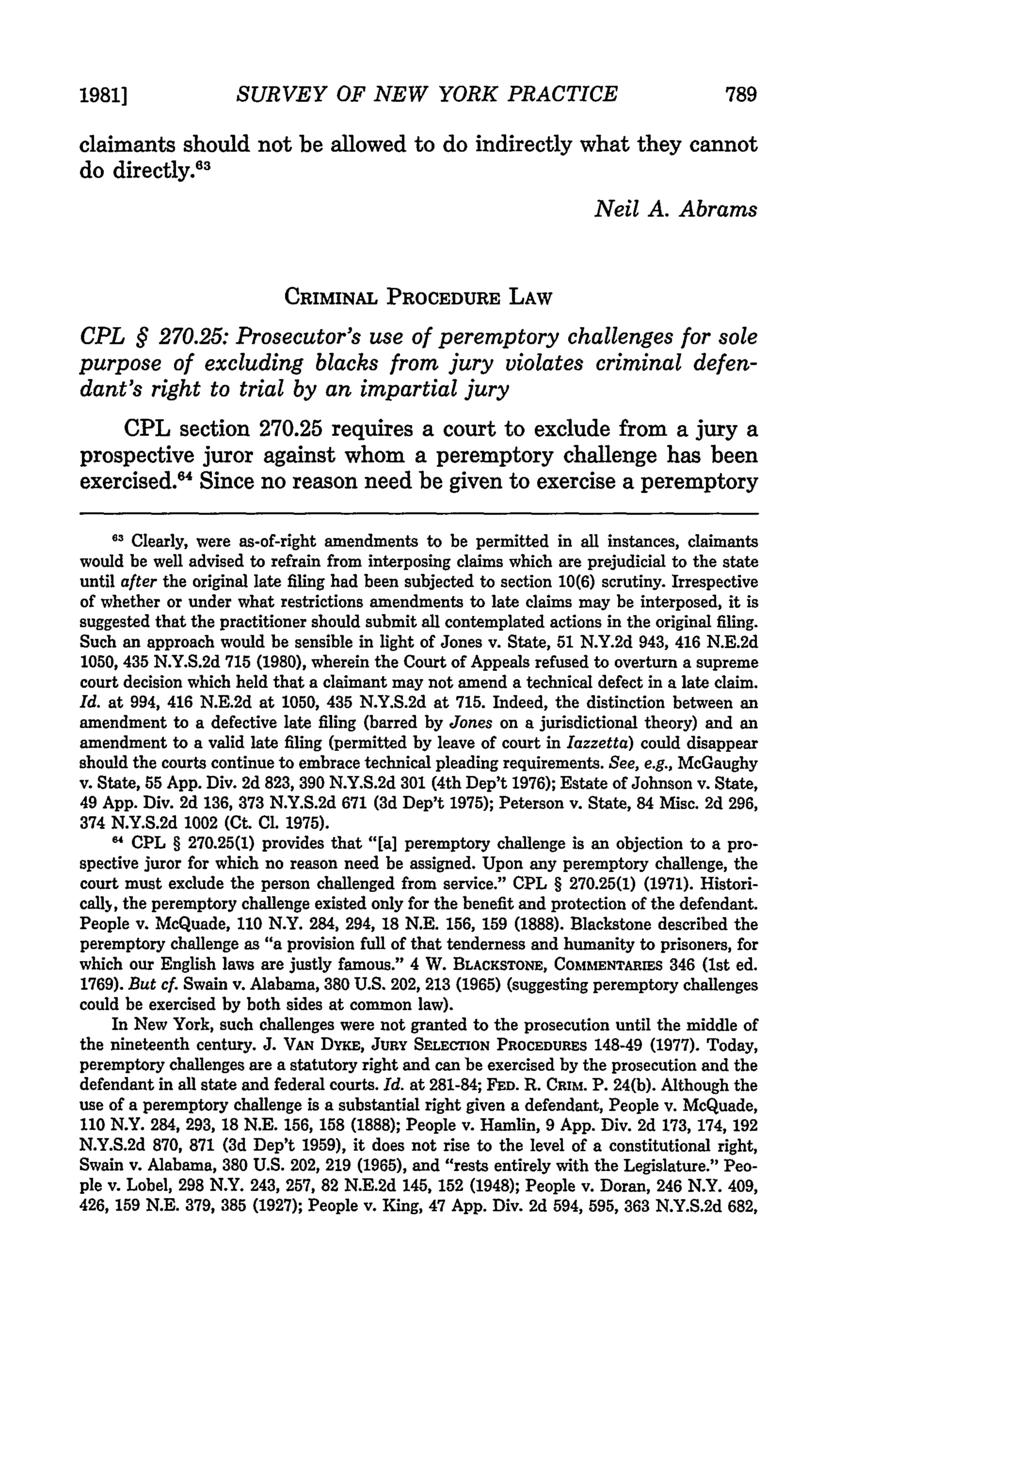 1981] SURVEY OF NEW YORK PRACTICE claimants should not be allowed to do indirectly what they cannot do directly. 3 Neil A. Abrams CRIMINAL PROCEDURE LAW CPL 270.